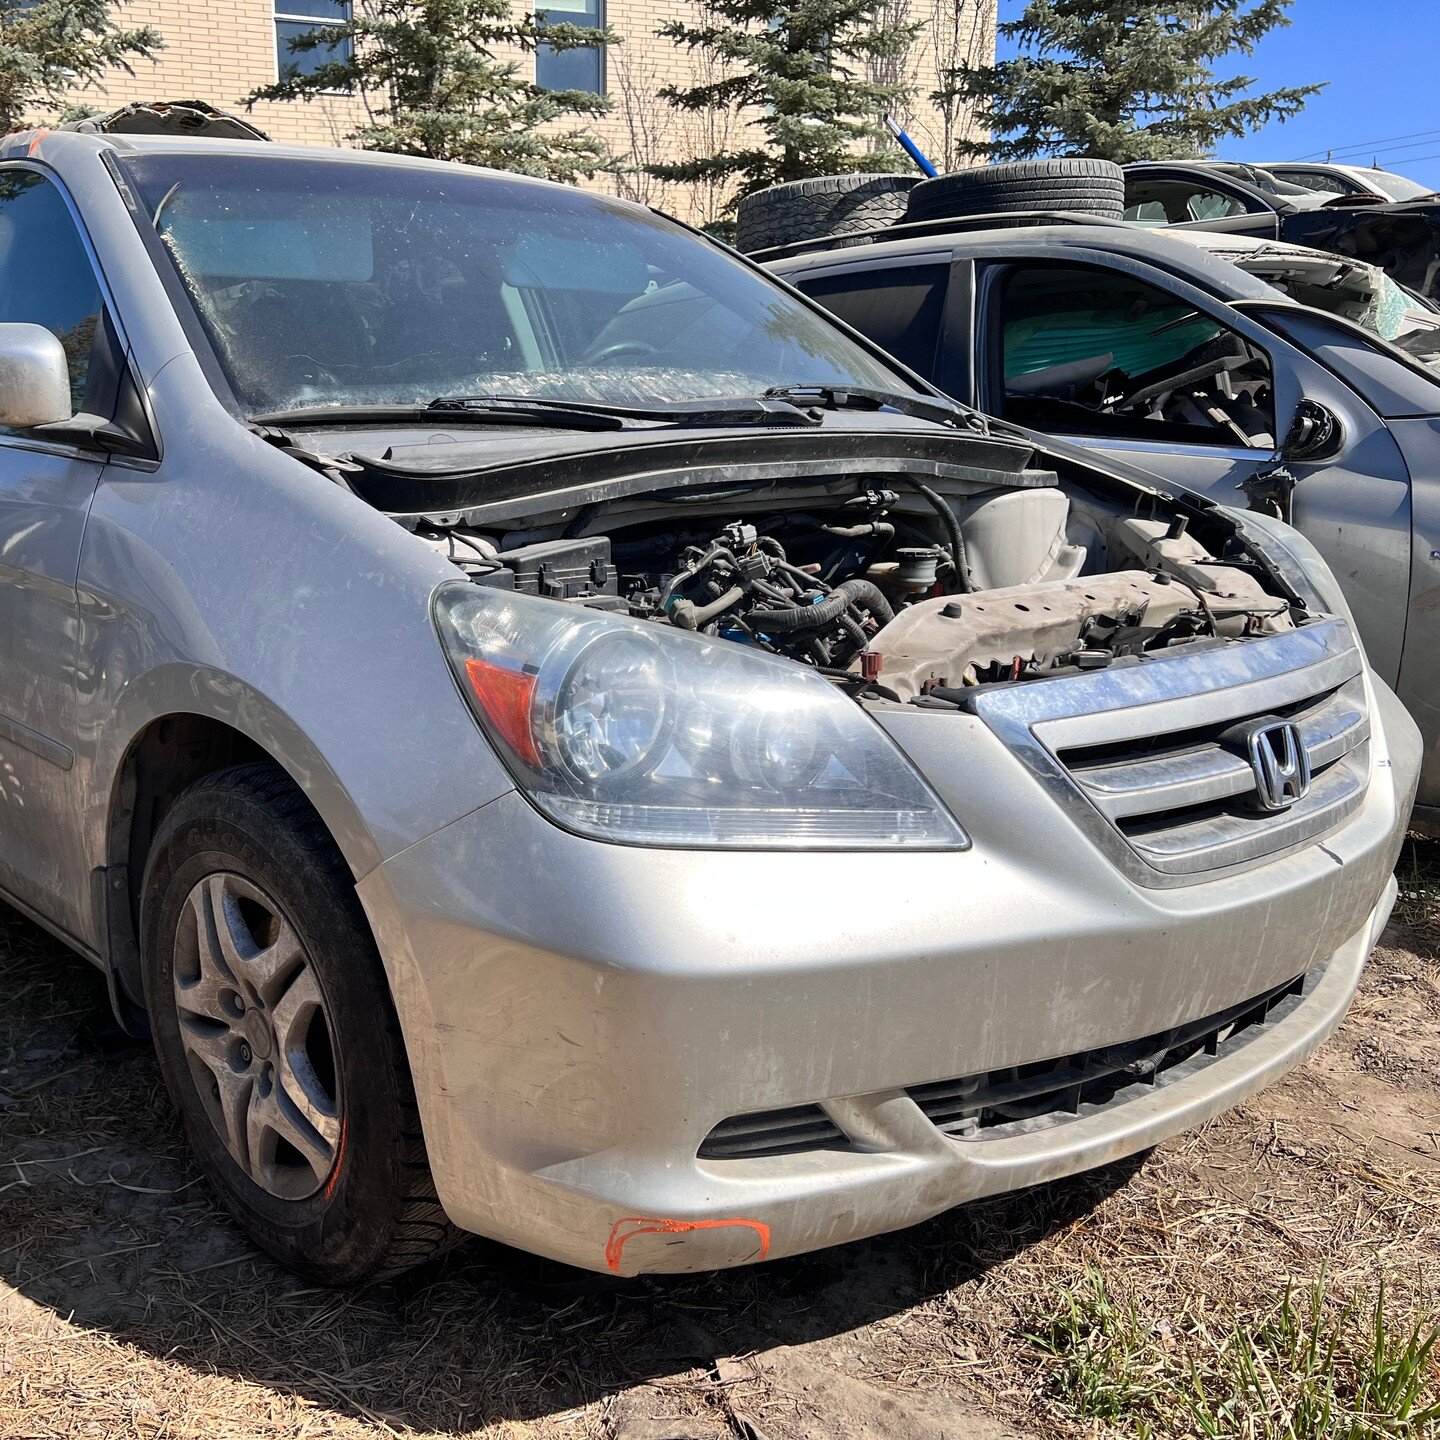 2005 HONDA ODYSSEY EX- L 3.5L *FOR PARTS* - FWD, 5 SPEED AUTOMATIC TRANSMISSION, 6 CYLINDER , GOLD(NH678M), KMS:280230, VIN:5FNRL38675B509178

We offer contactless delivery and are more than willing to accommodate your needs.
Why pick your part when 